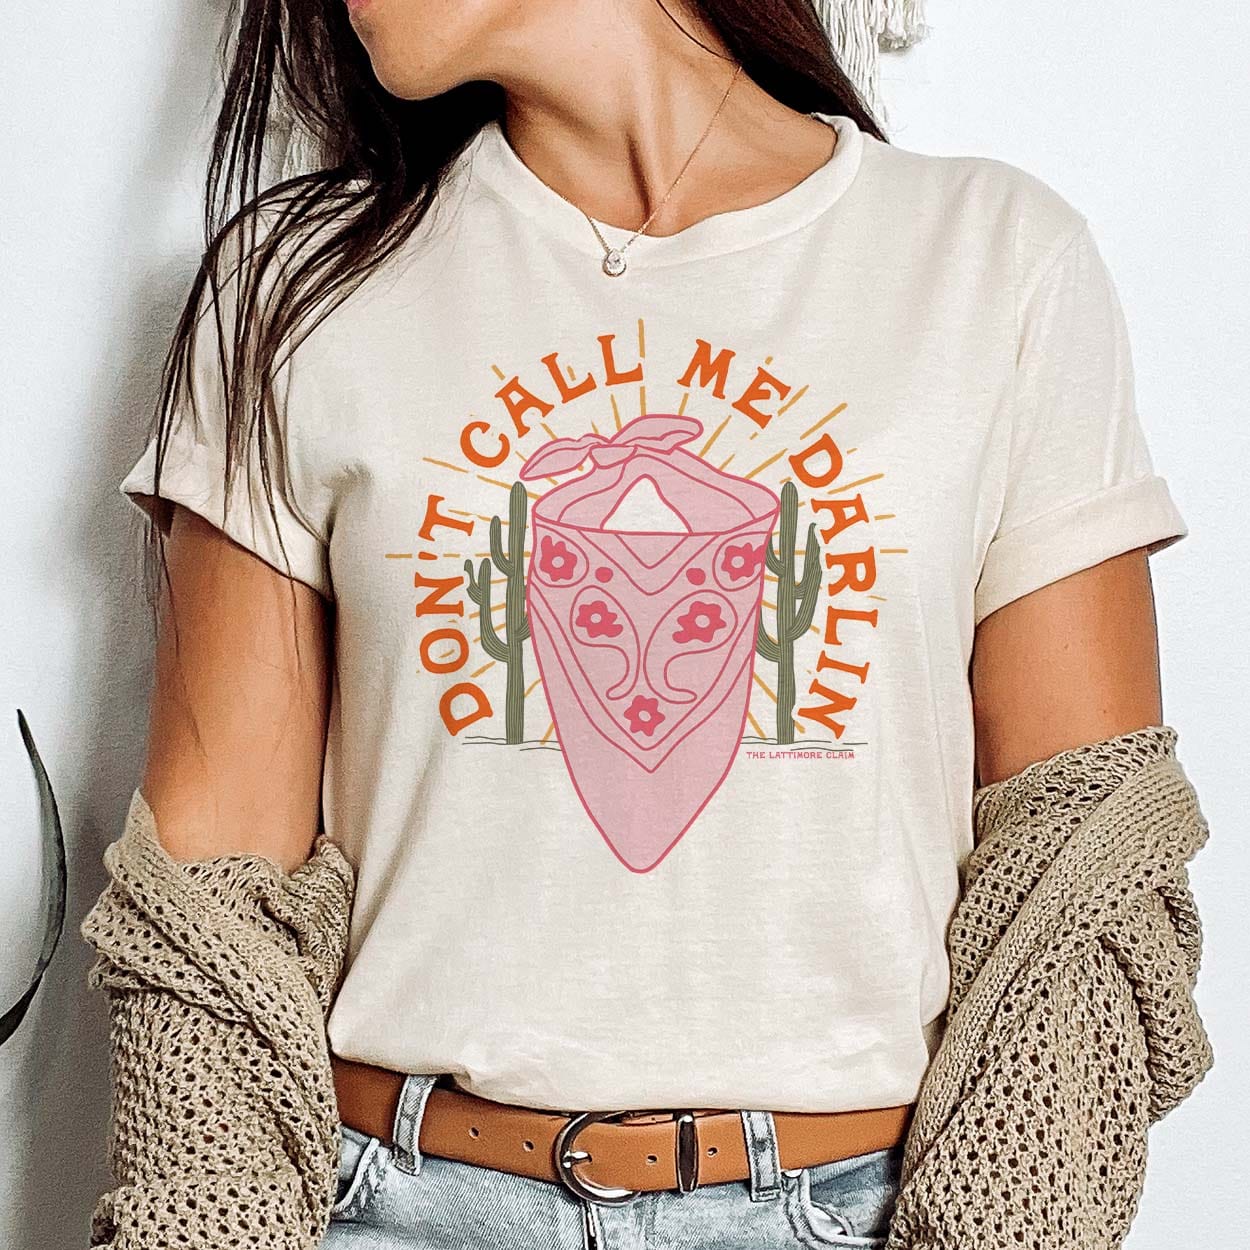 A cream colored short sleeve shirt with cuffed sleeves featuring a graphic of a pink floral bandana with a green cactus on both sides and light orange rays coming from behind the bandana. The text "Dont call me darlin" is curved around the top of the graphic in orange. Item is pictured on a white background